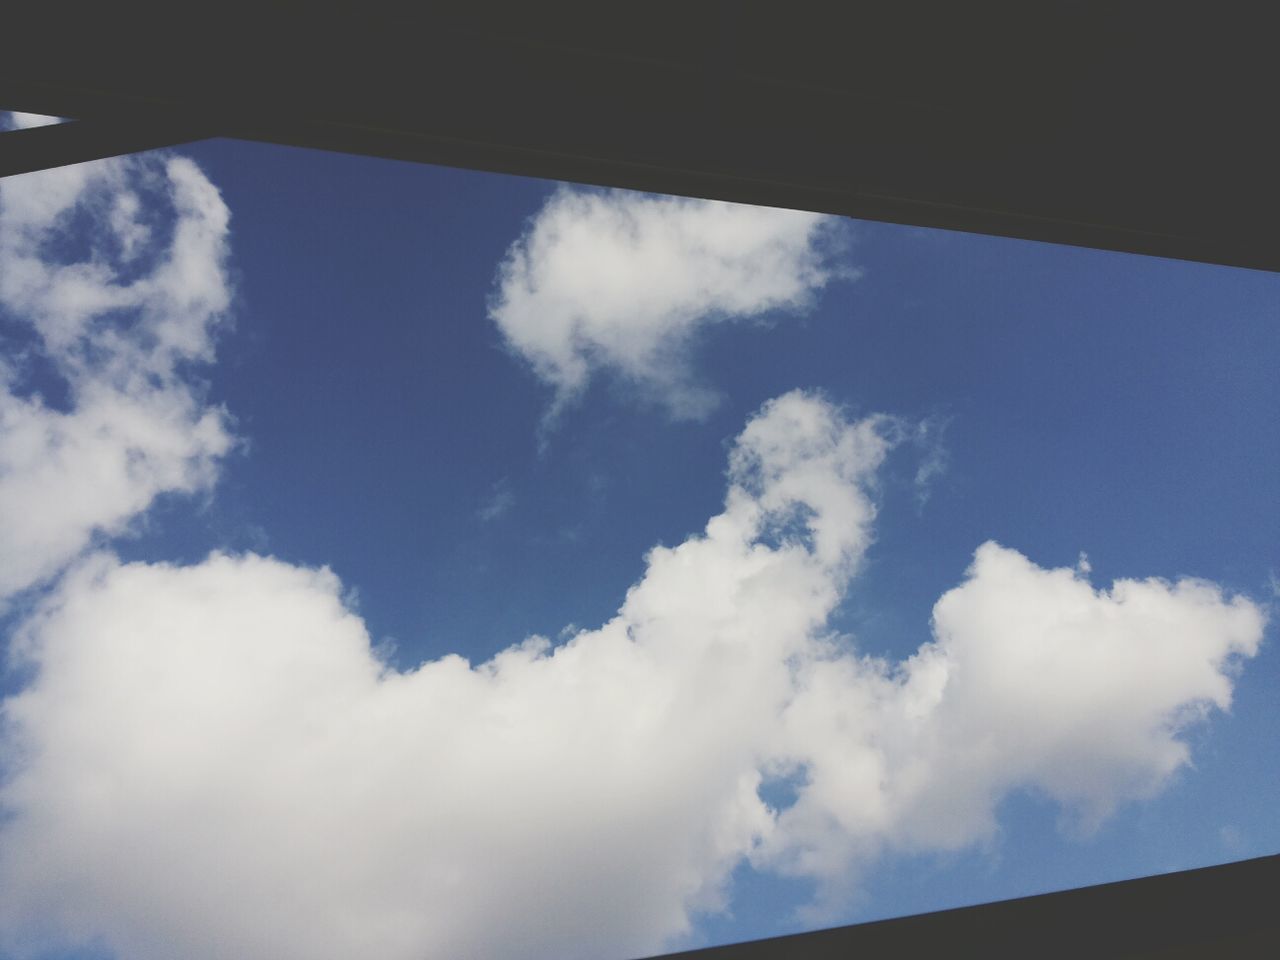 sky, low angle view, cloud - sky, cloud, blue, nature, cloudy, window, beauty in nature, day, scenics, tranquility, no people, cloudscape, outdoors, tranquil scene, white color, high section, part of, idyllic